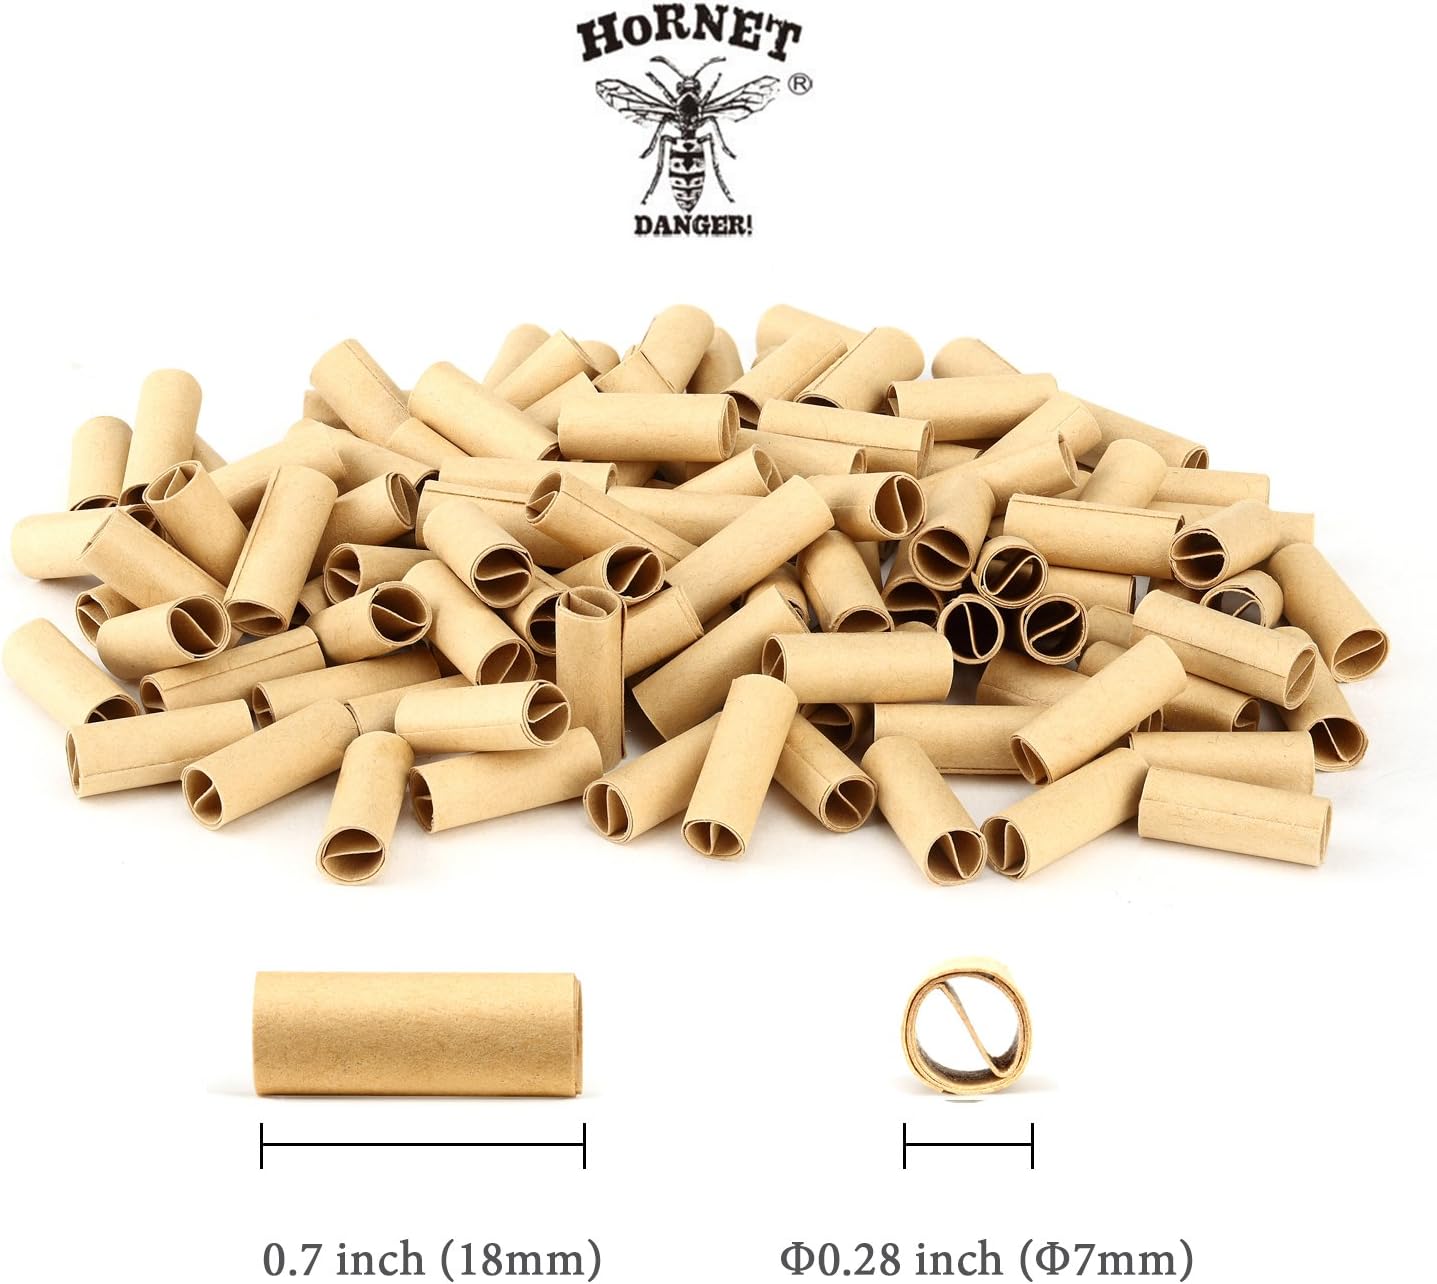 HORNET Unbleached Pre-Rolled Tips, Unrefined and Raw Cigarette Filters_1